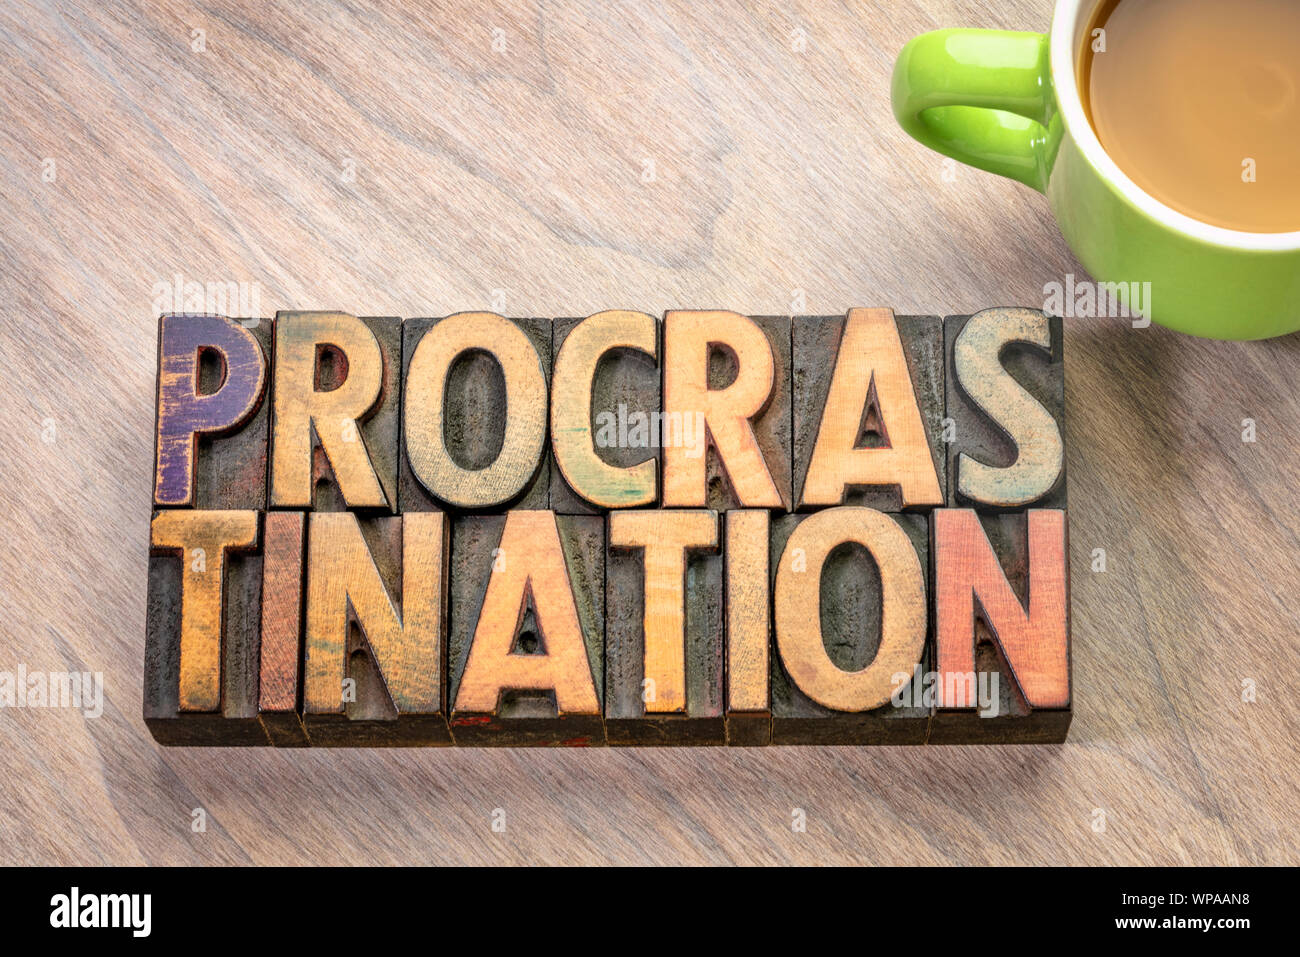 procrastination  word abstract in vintage letterpress wood type with a cup of coffee, efficiency and productivity concept Stock Photo